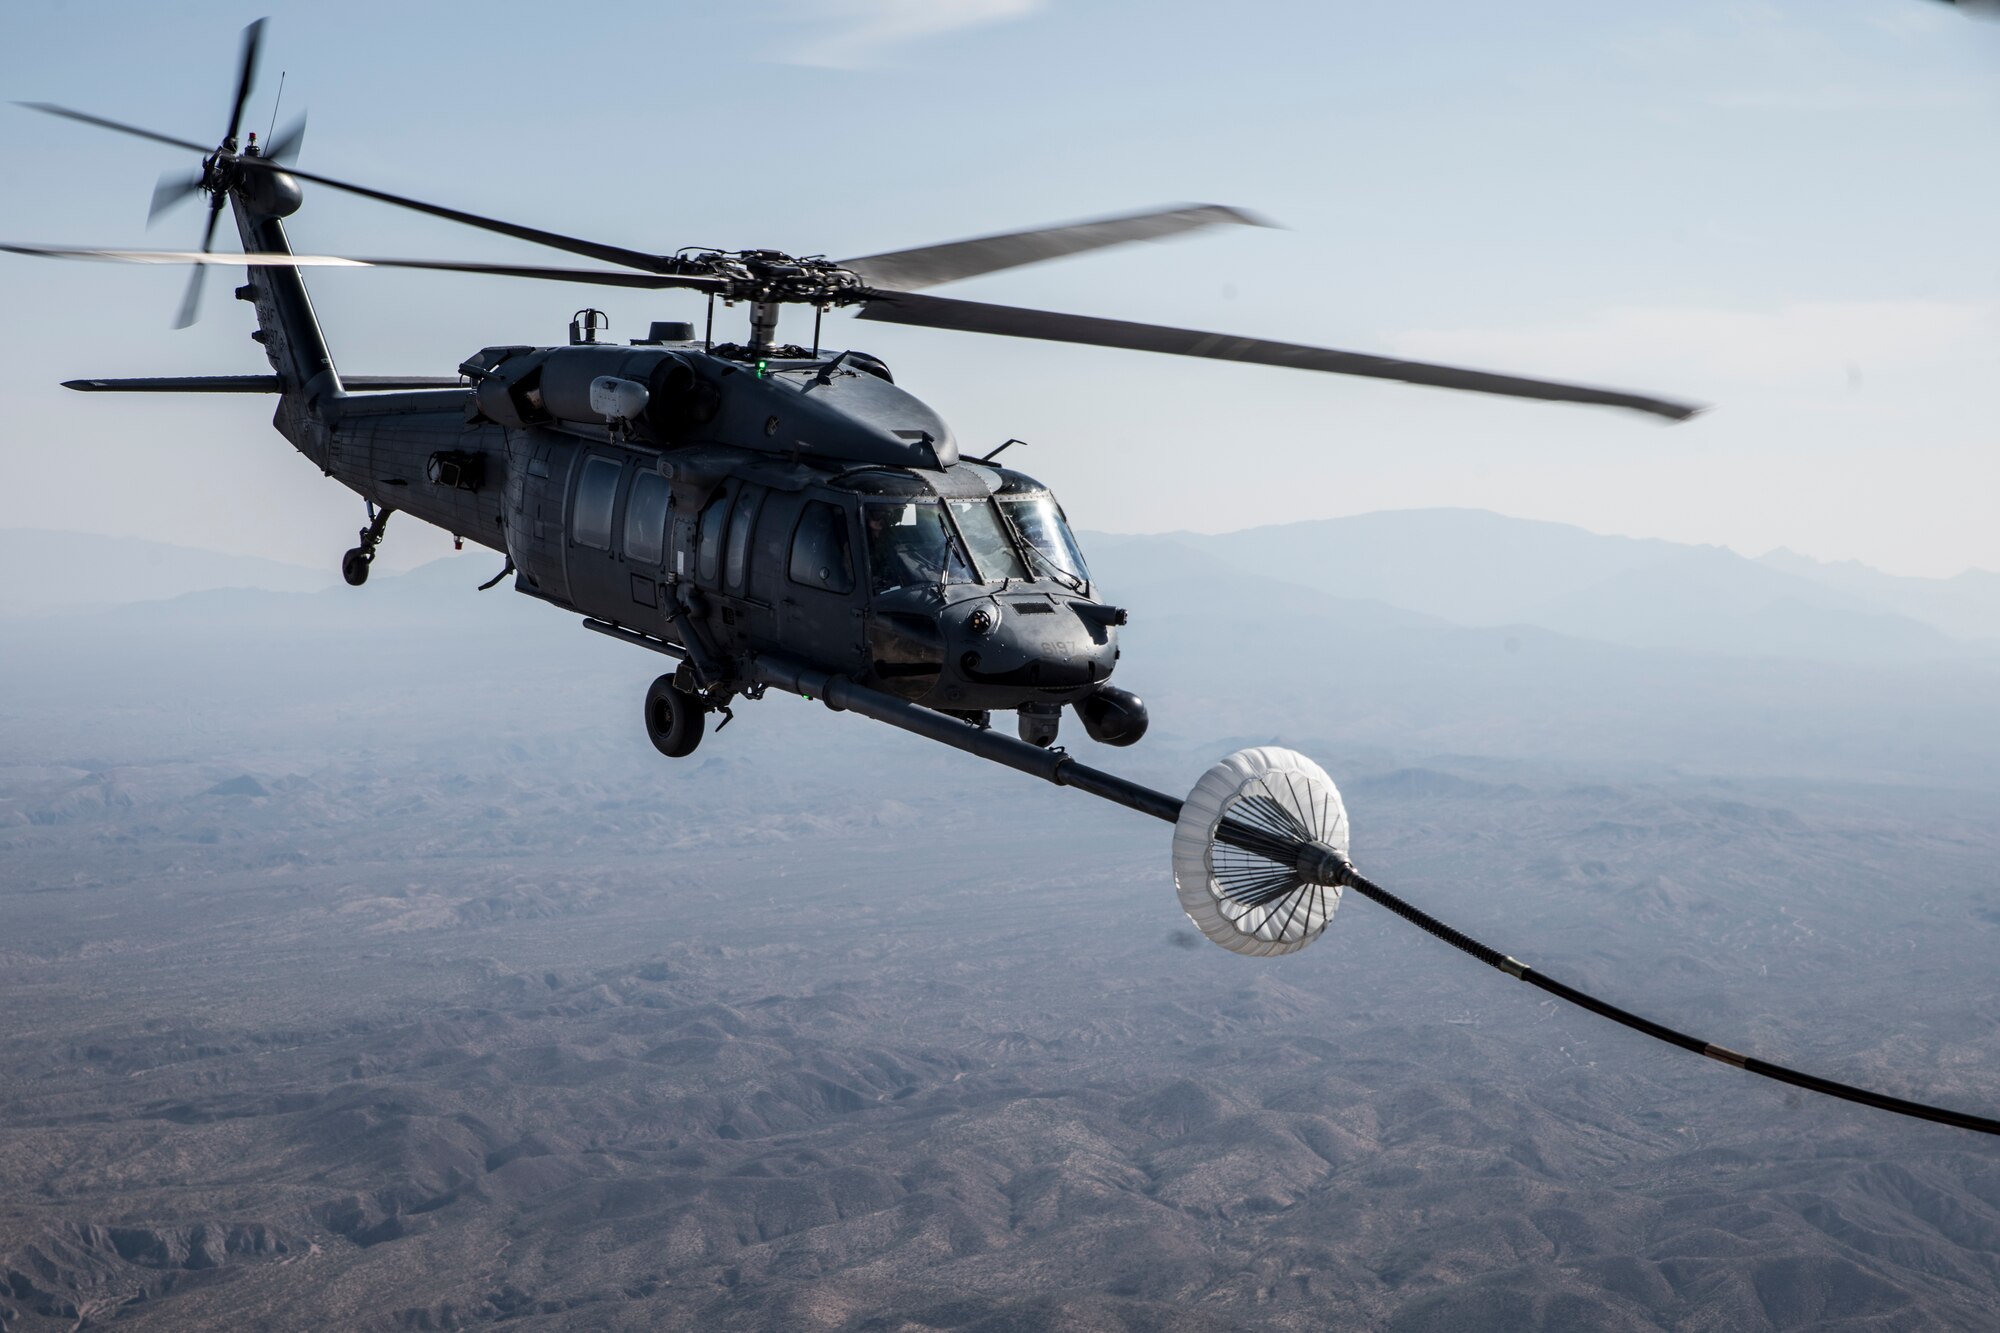 A photo of a helicopter performing air-to-air refueling